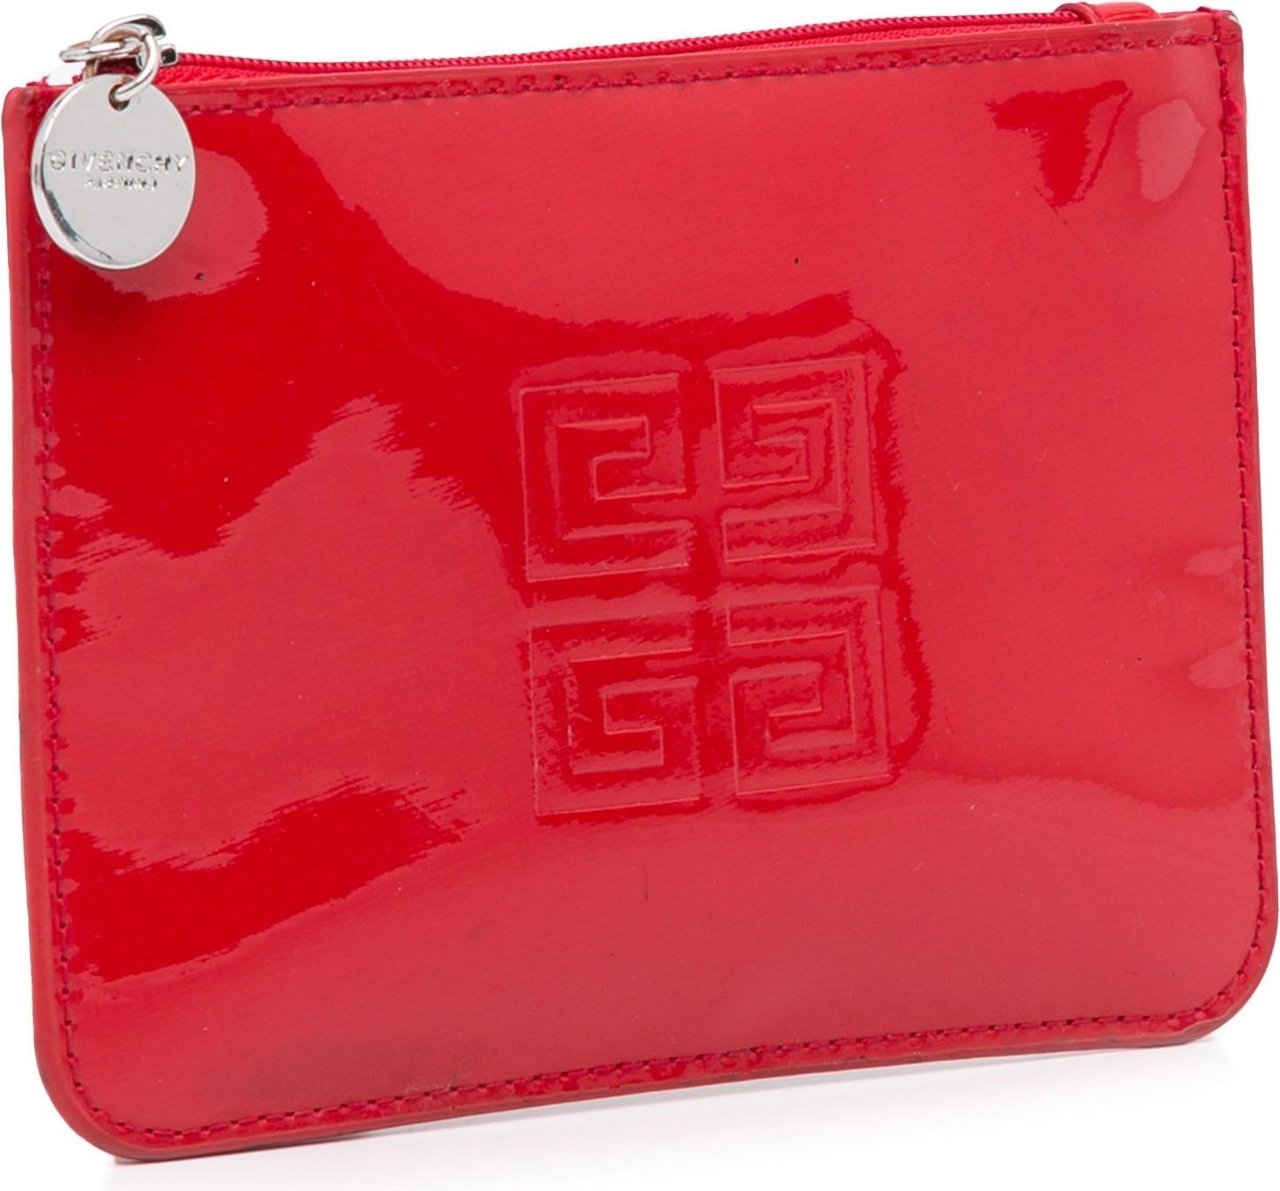 Givenchy Patent Leather Coin Pouch Rood